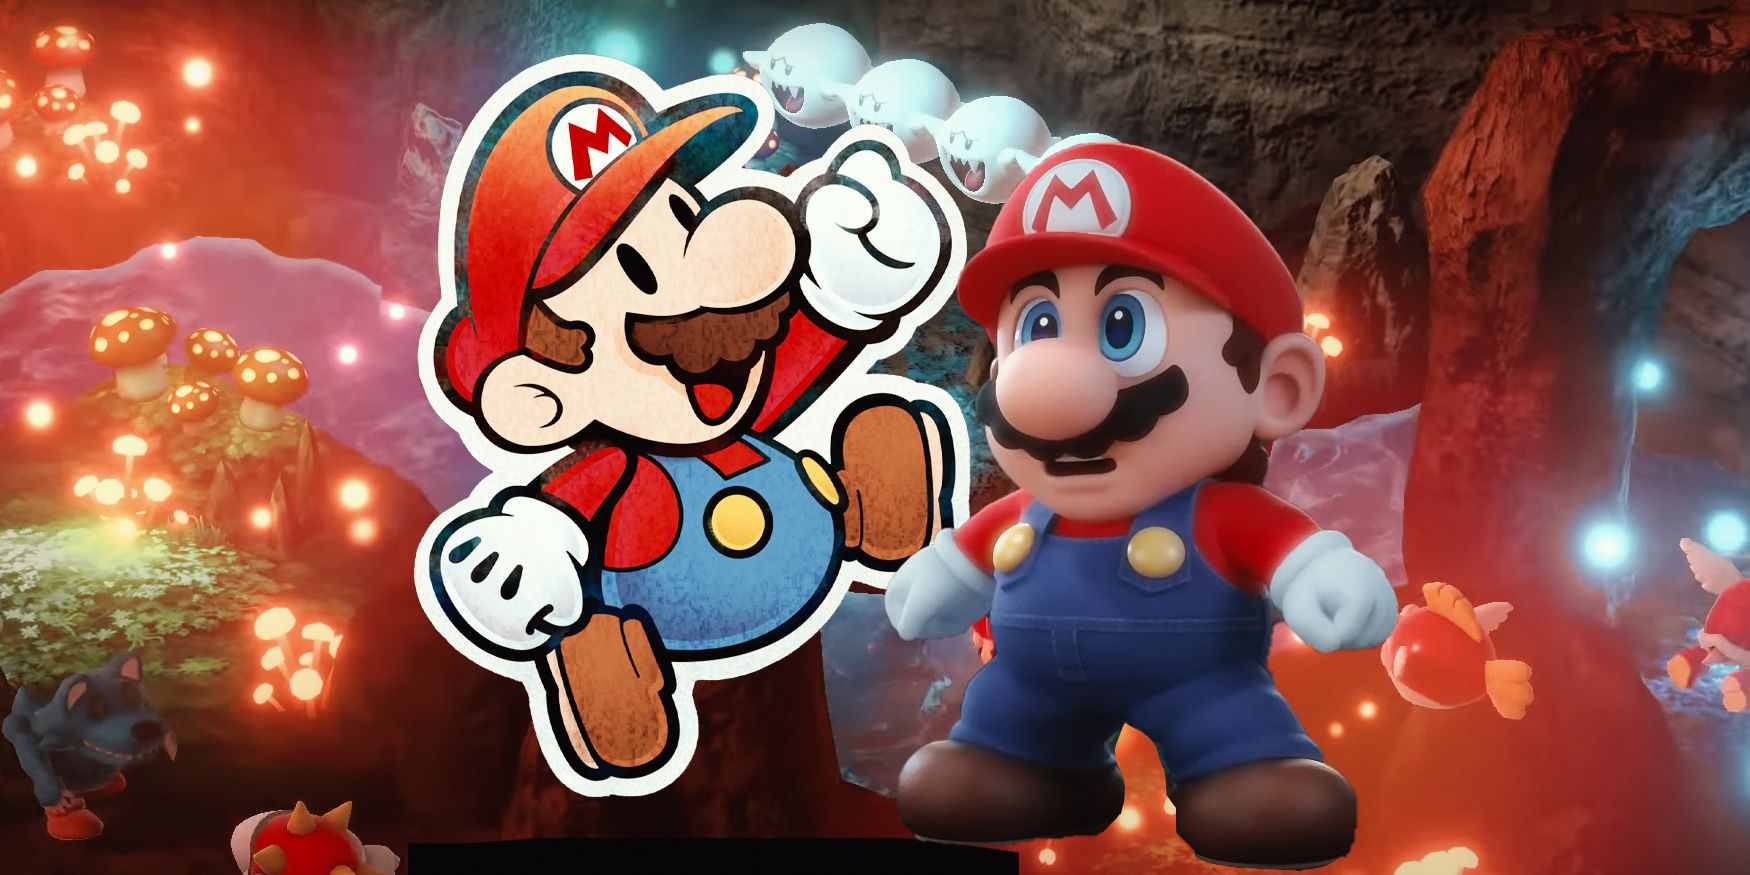 Paper Mario next to the Mario model from the Super Mario RPG remake over a background from the upcoming game.